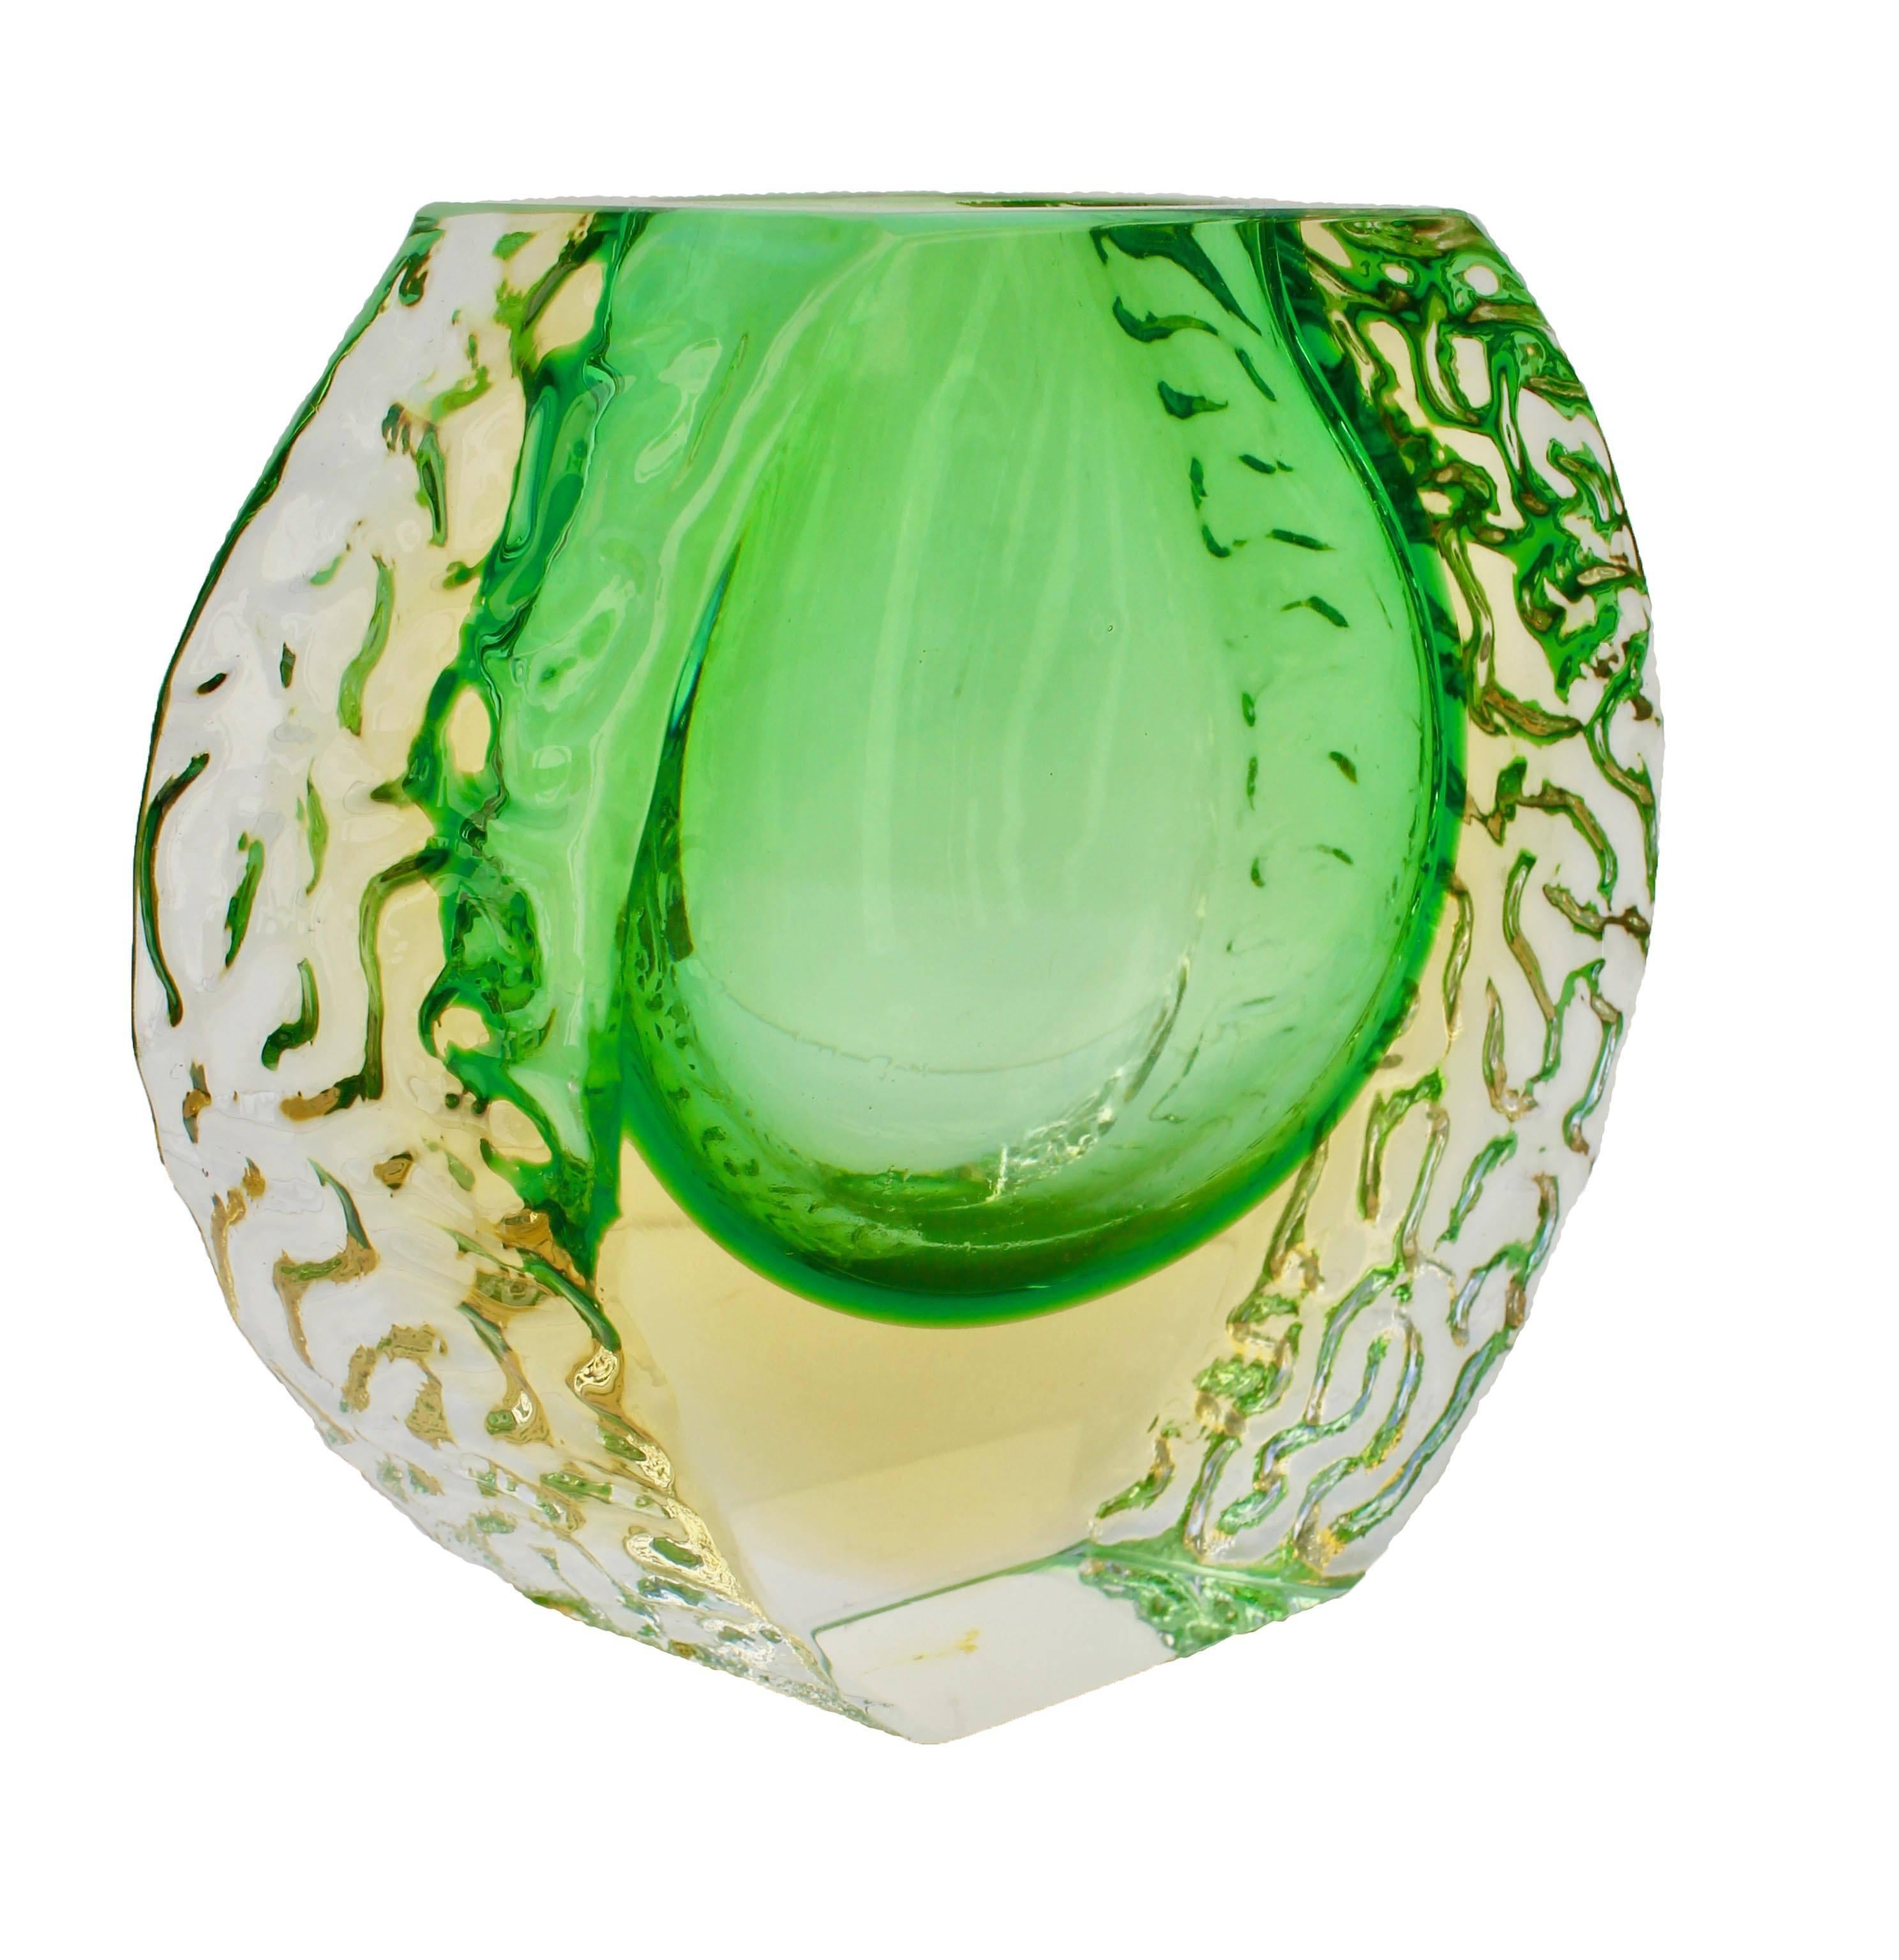 About:
Textured and faceted Murano Sommerso green and yellow ice glass vase by Alessandro Mandruzzato.

The piece is in excellent condition and a real beauty!
Measures: 
Height 15 cm
Width 10 cm
Depth 4.5